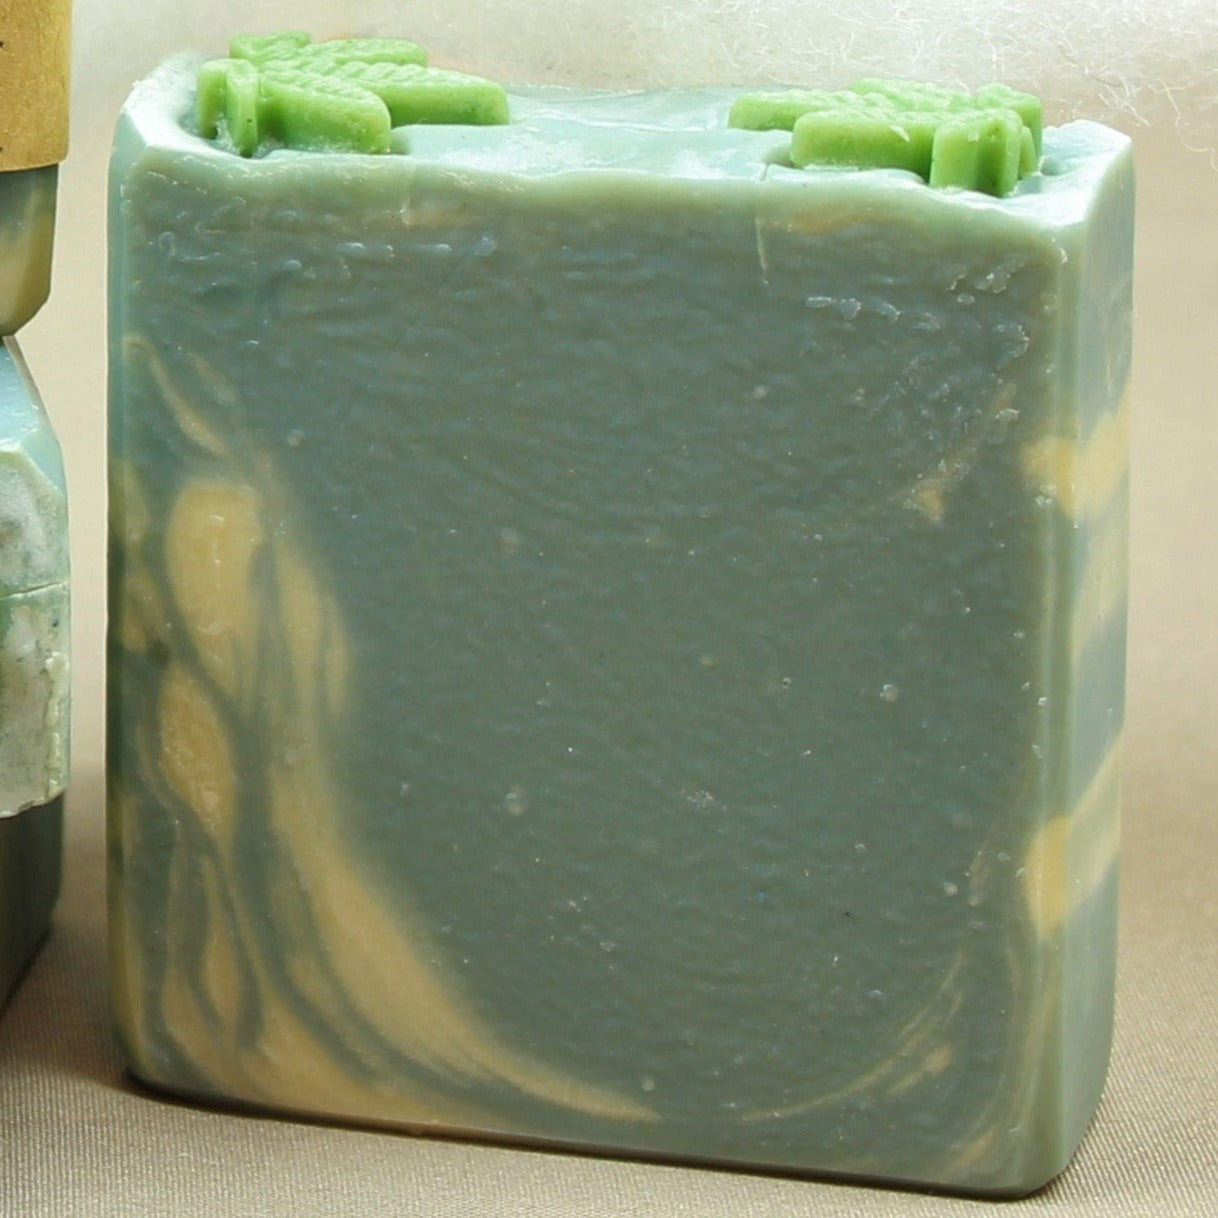 Pictured handmade body soap bar, Sloth. Shown without label. Soap is sky blue and white, with green cannabis leaf shaped soap on top, and scented in cannabis flower.